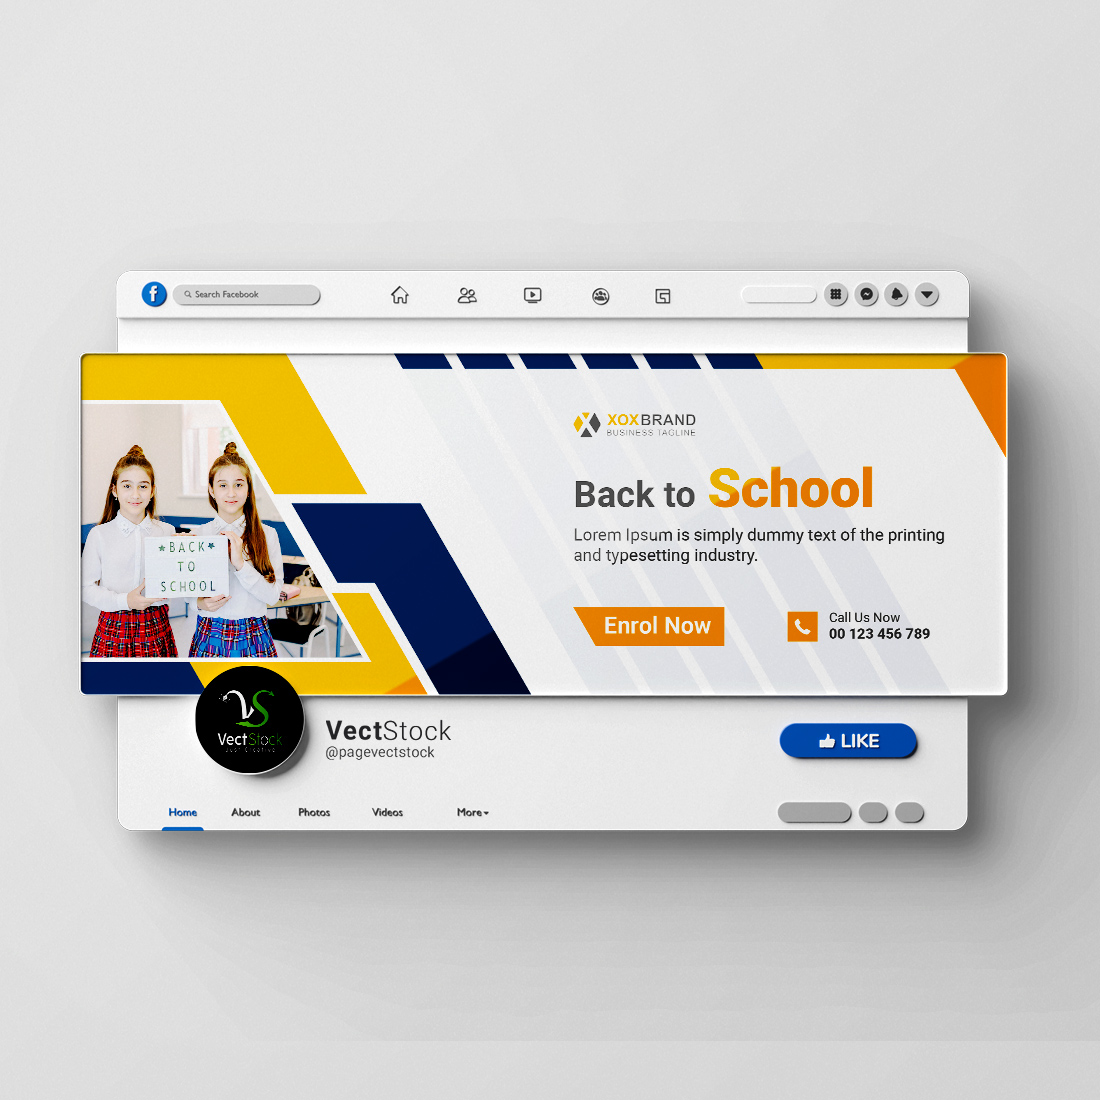 Back to school facebook cover design template preview image.